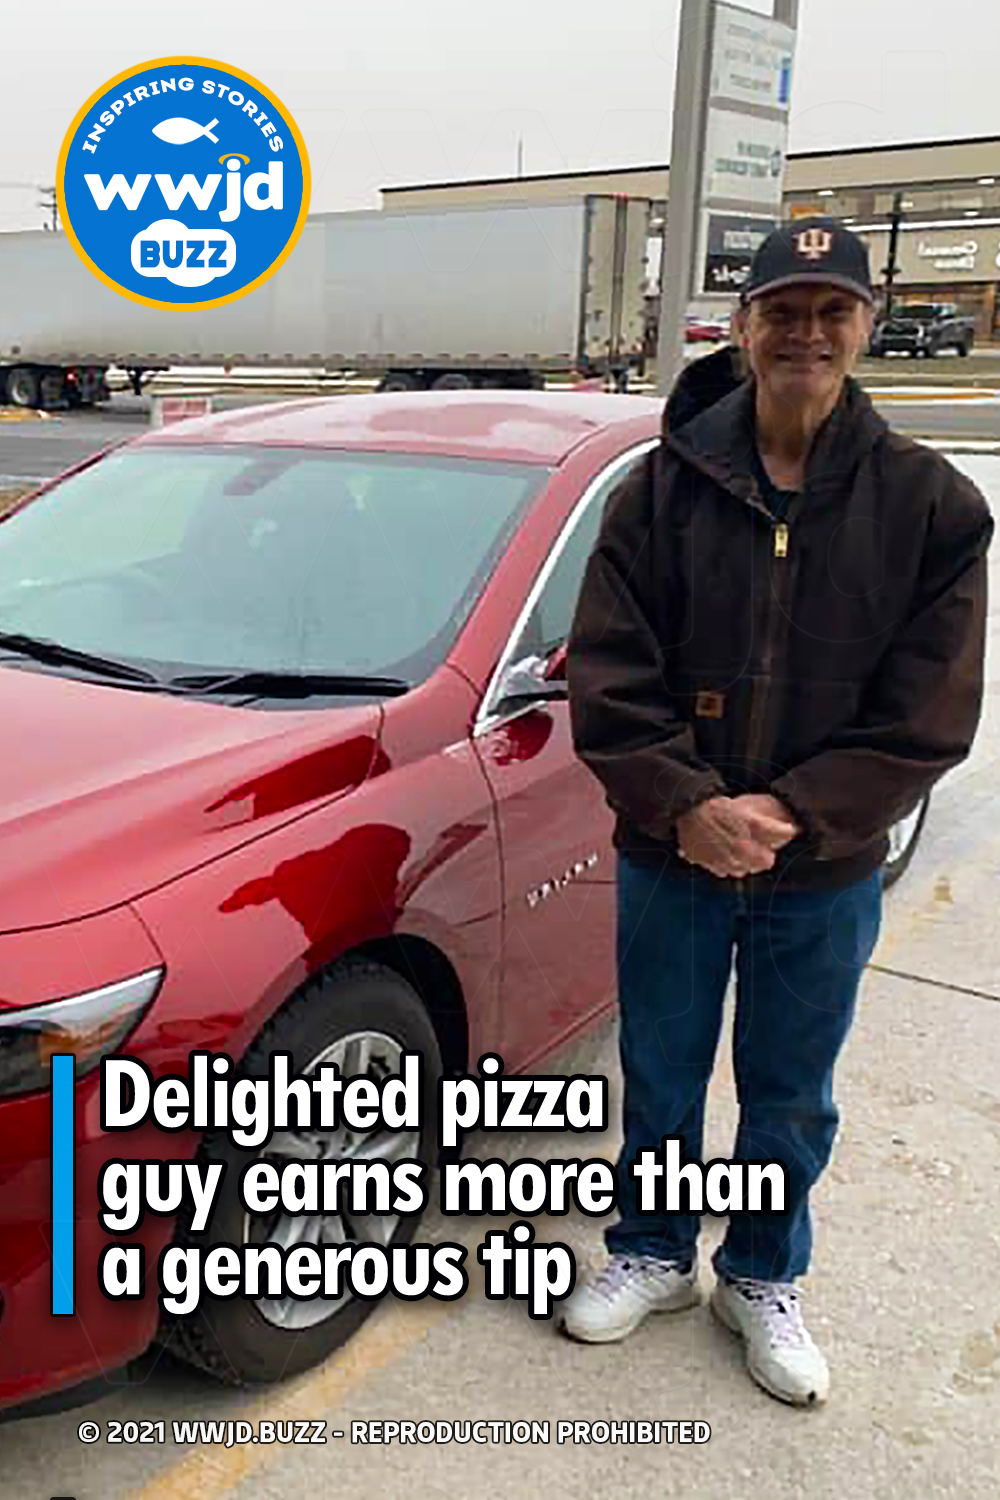 Delighted pizza guy earns more than a generous tip